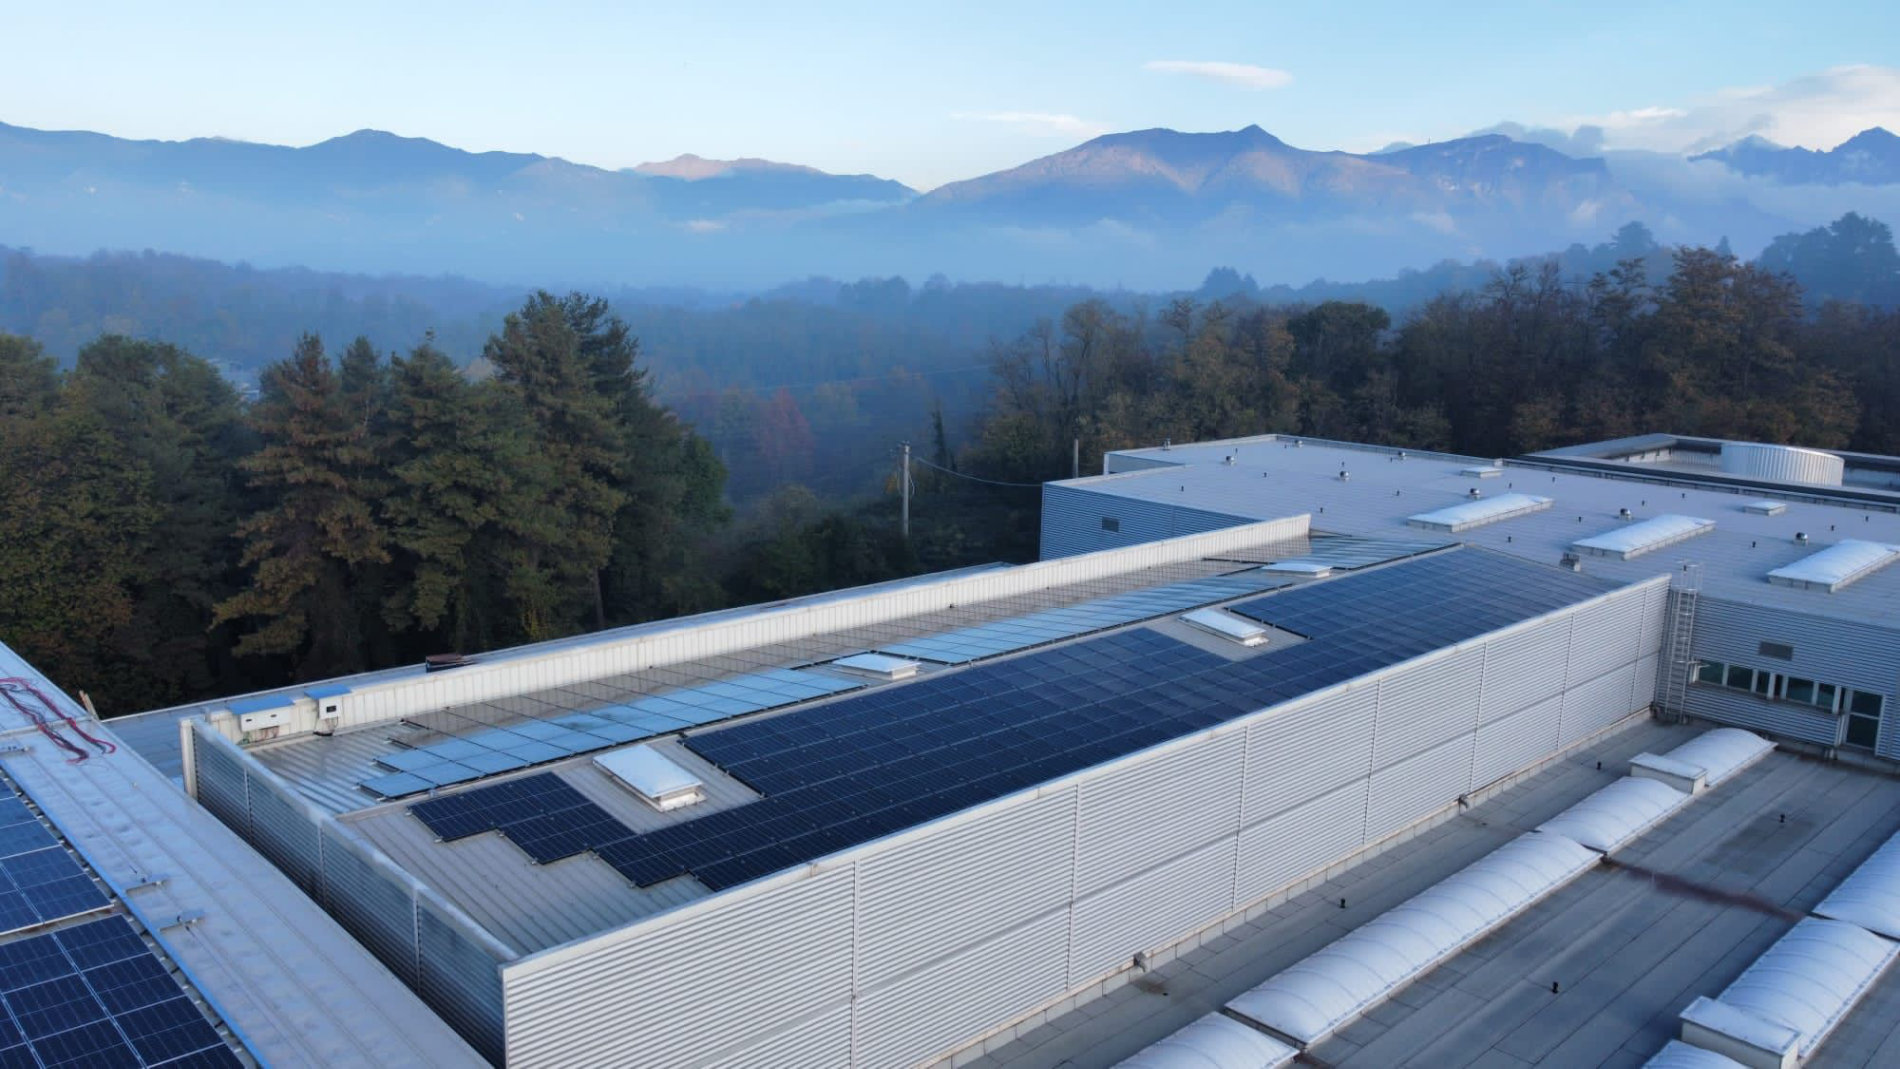 Good prospects for the climate. The photovoltaic panels of Pozzi Arturo Spa. generate up to 60 percent of the company’s energy needs (Photo: Pozzi Arturo Spa.)